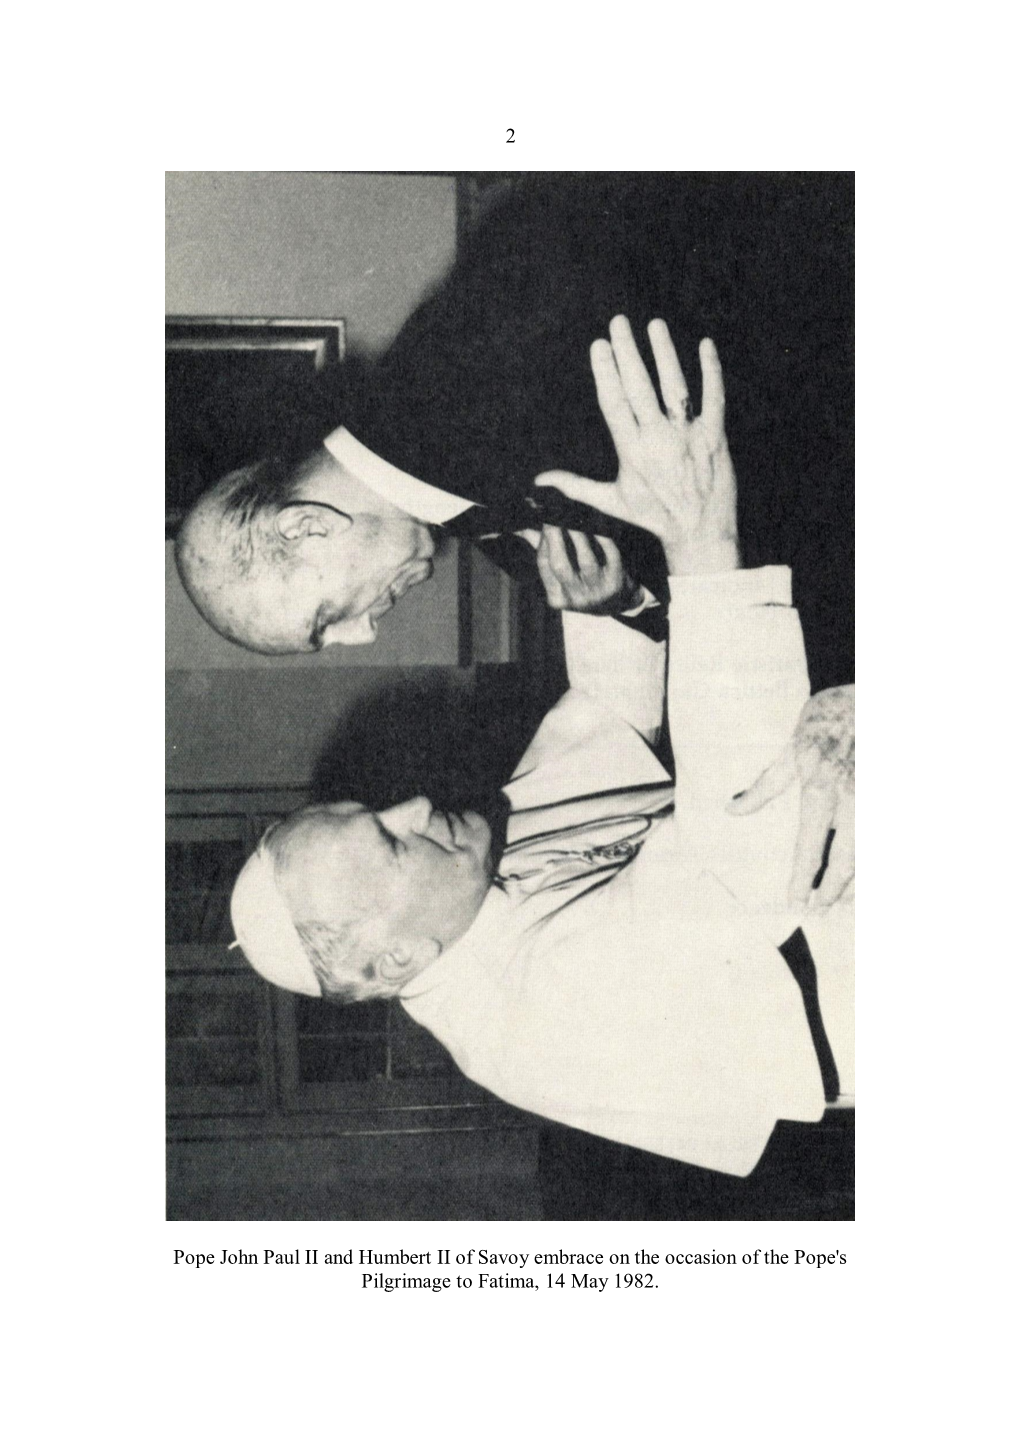 Humbert II of Savoy Embrace on the Occasion of the Pope's Pilgrimage to Fatima, 14 May 1982